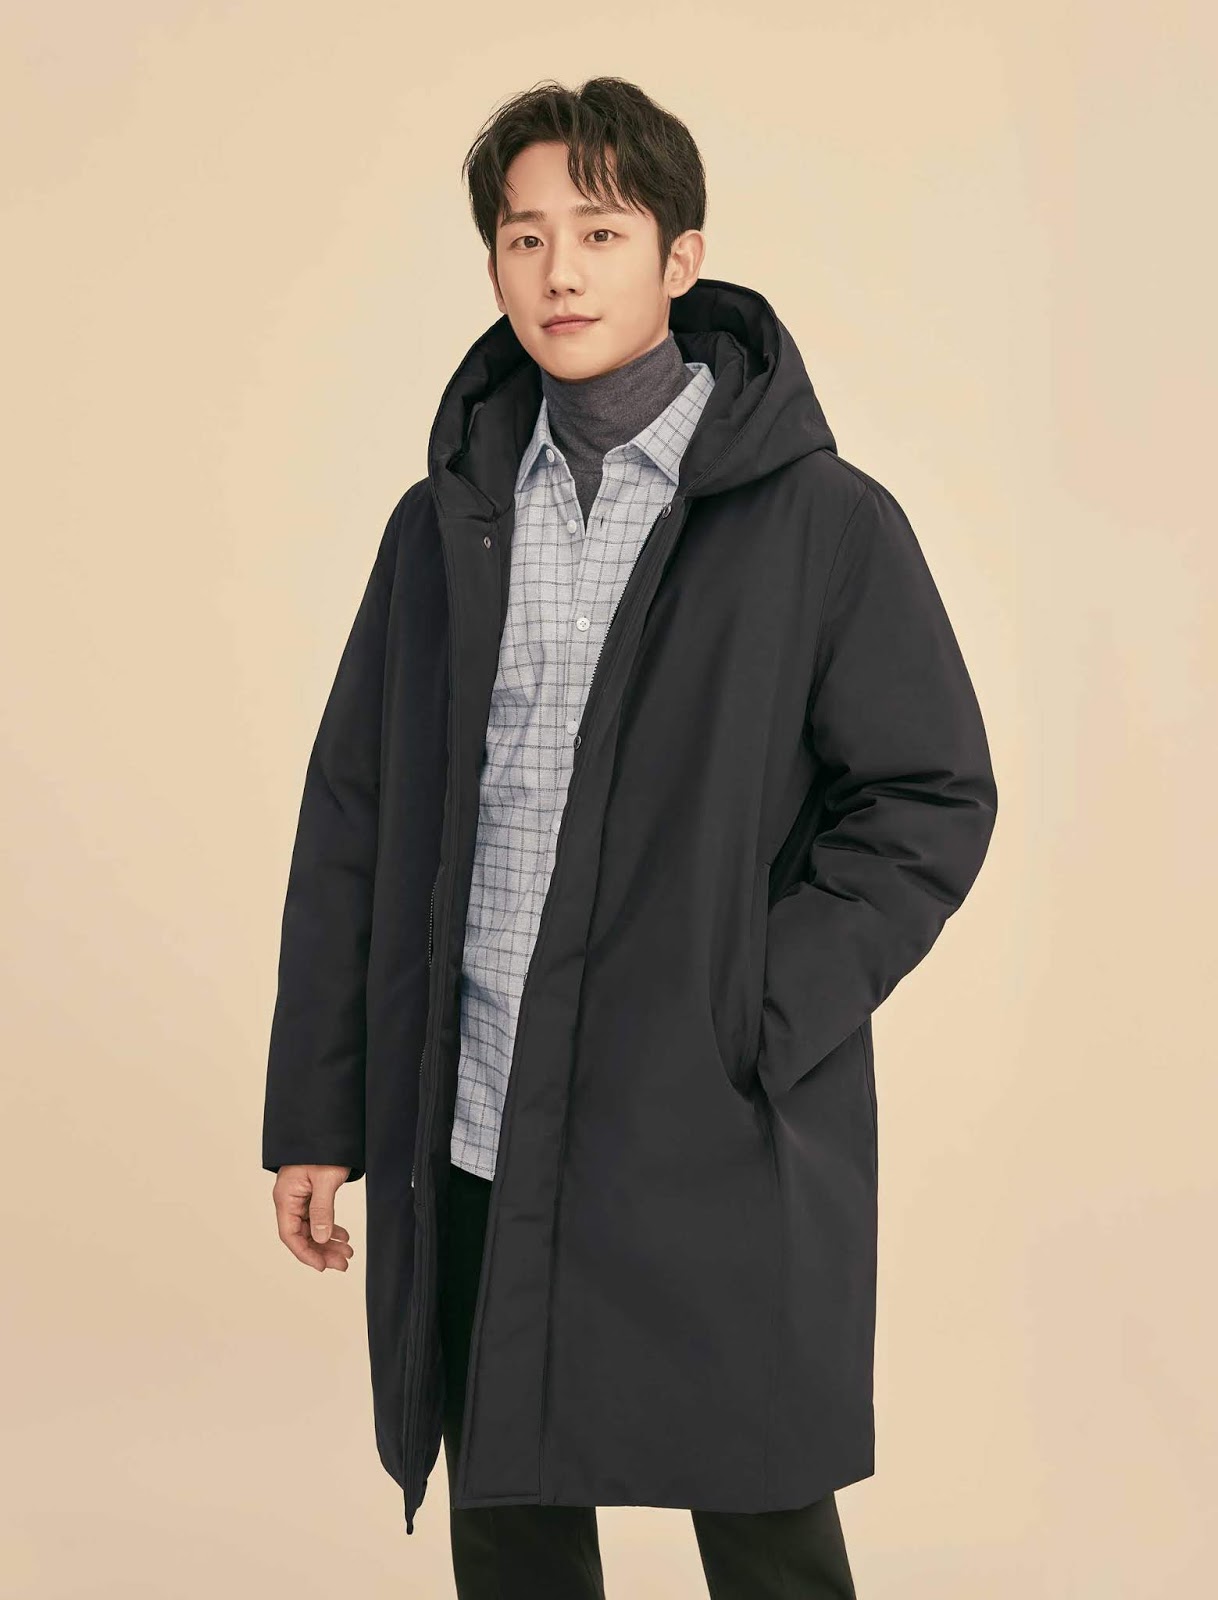 Jung Hae In Mind Bridge 2019 Fall Collection